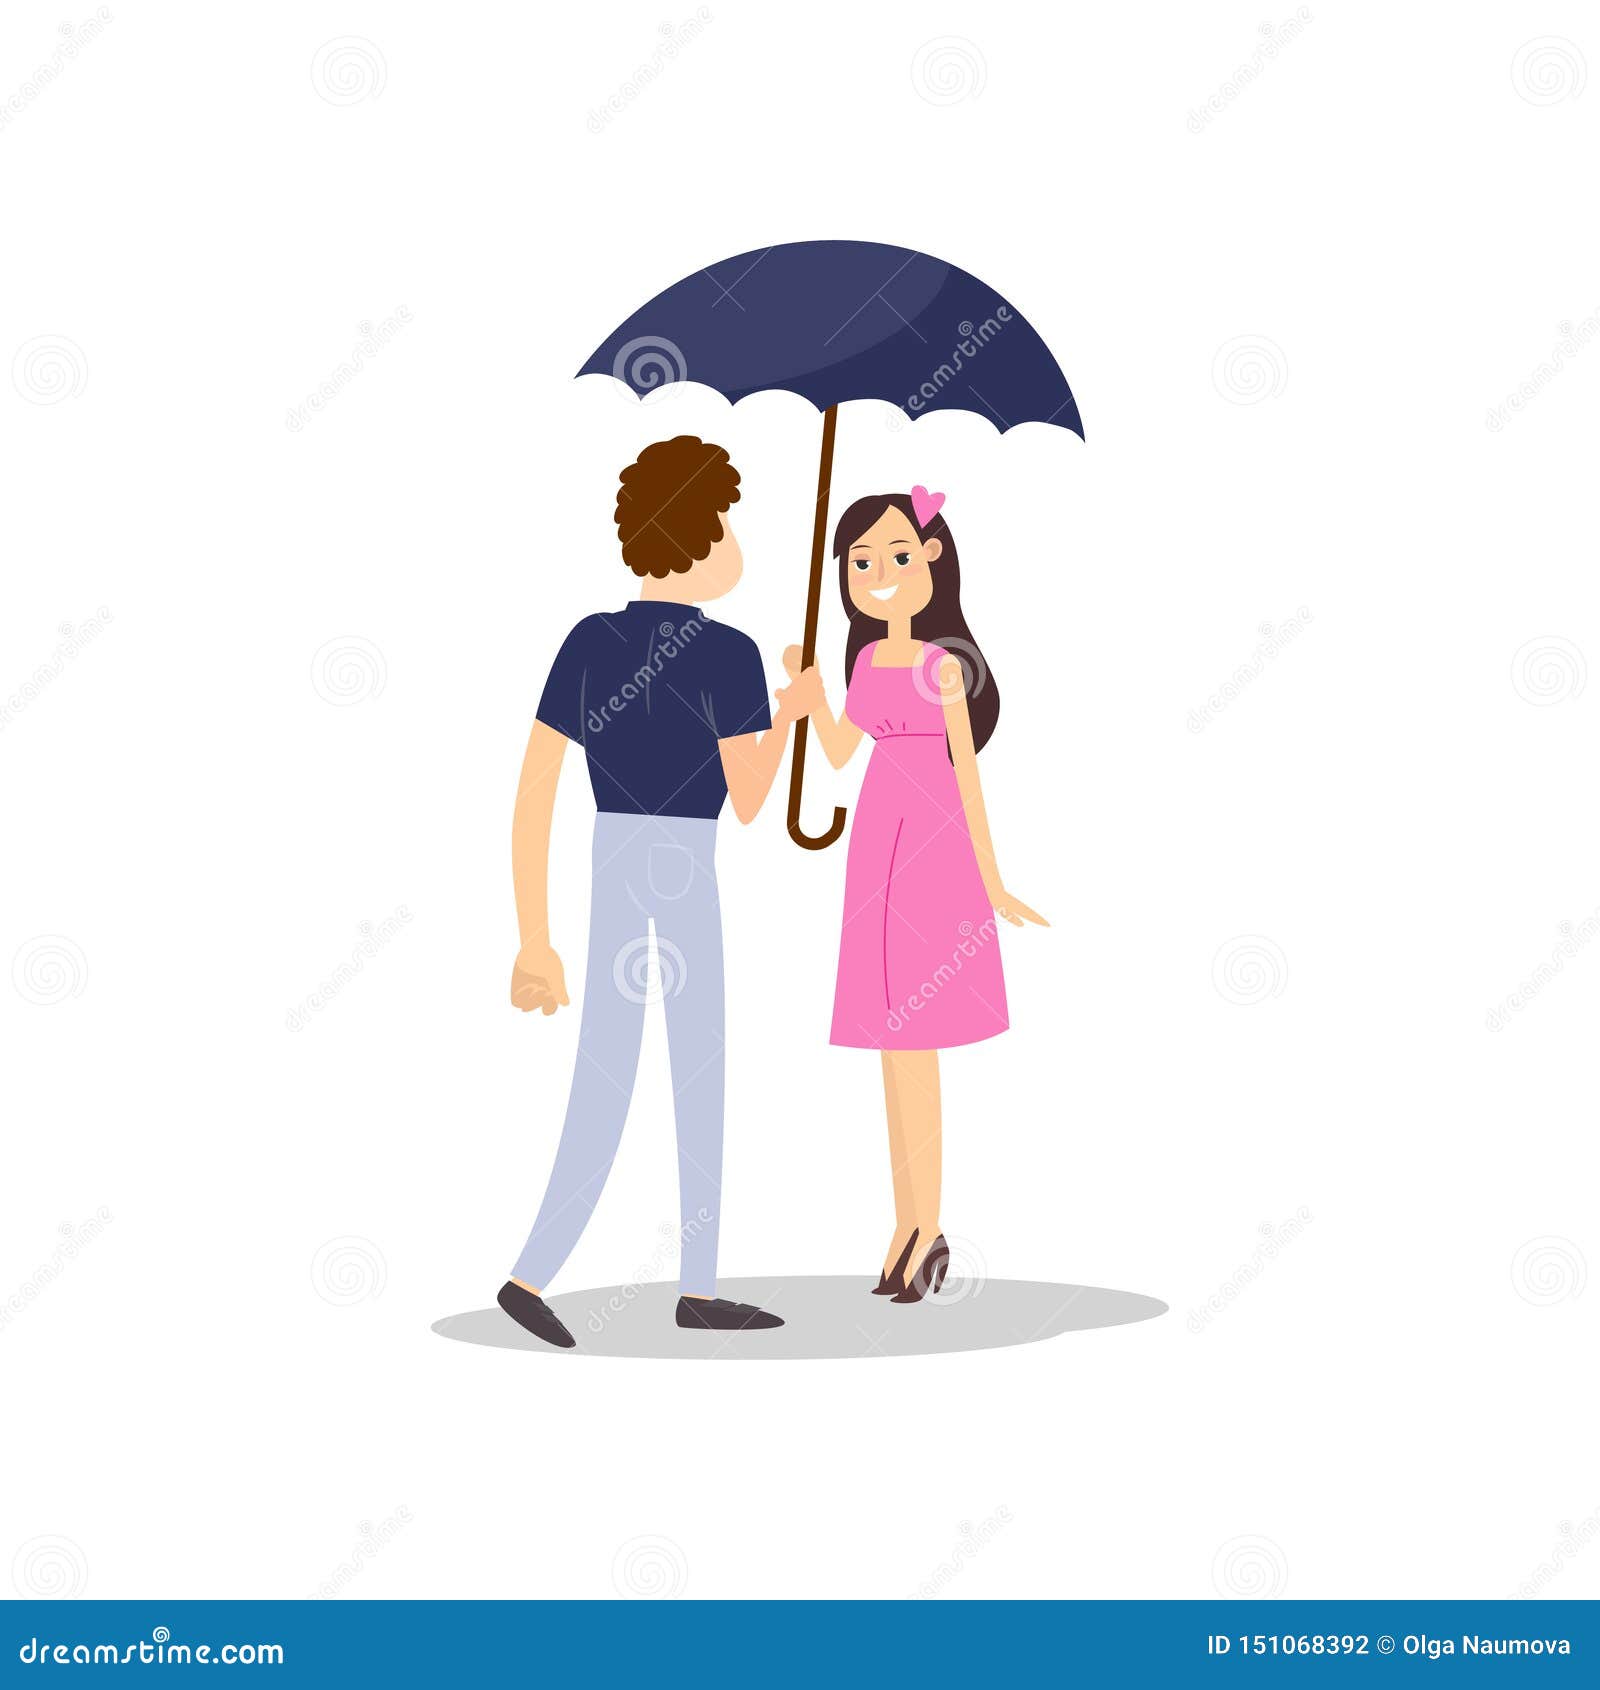 Sketch Of Couple Of Teen Students Walking Along Street On Summer Day  Royalty Free SVG, Cliparts, Vectors, And Stock Illustration. Image  135556105.